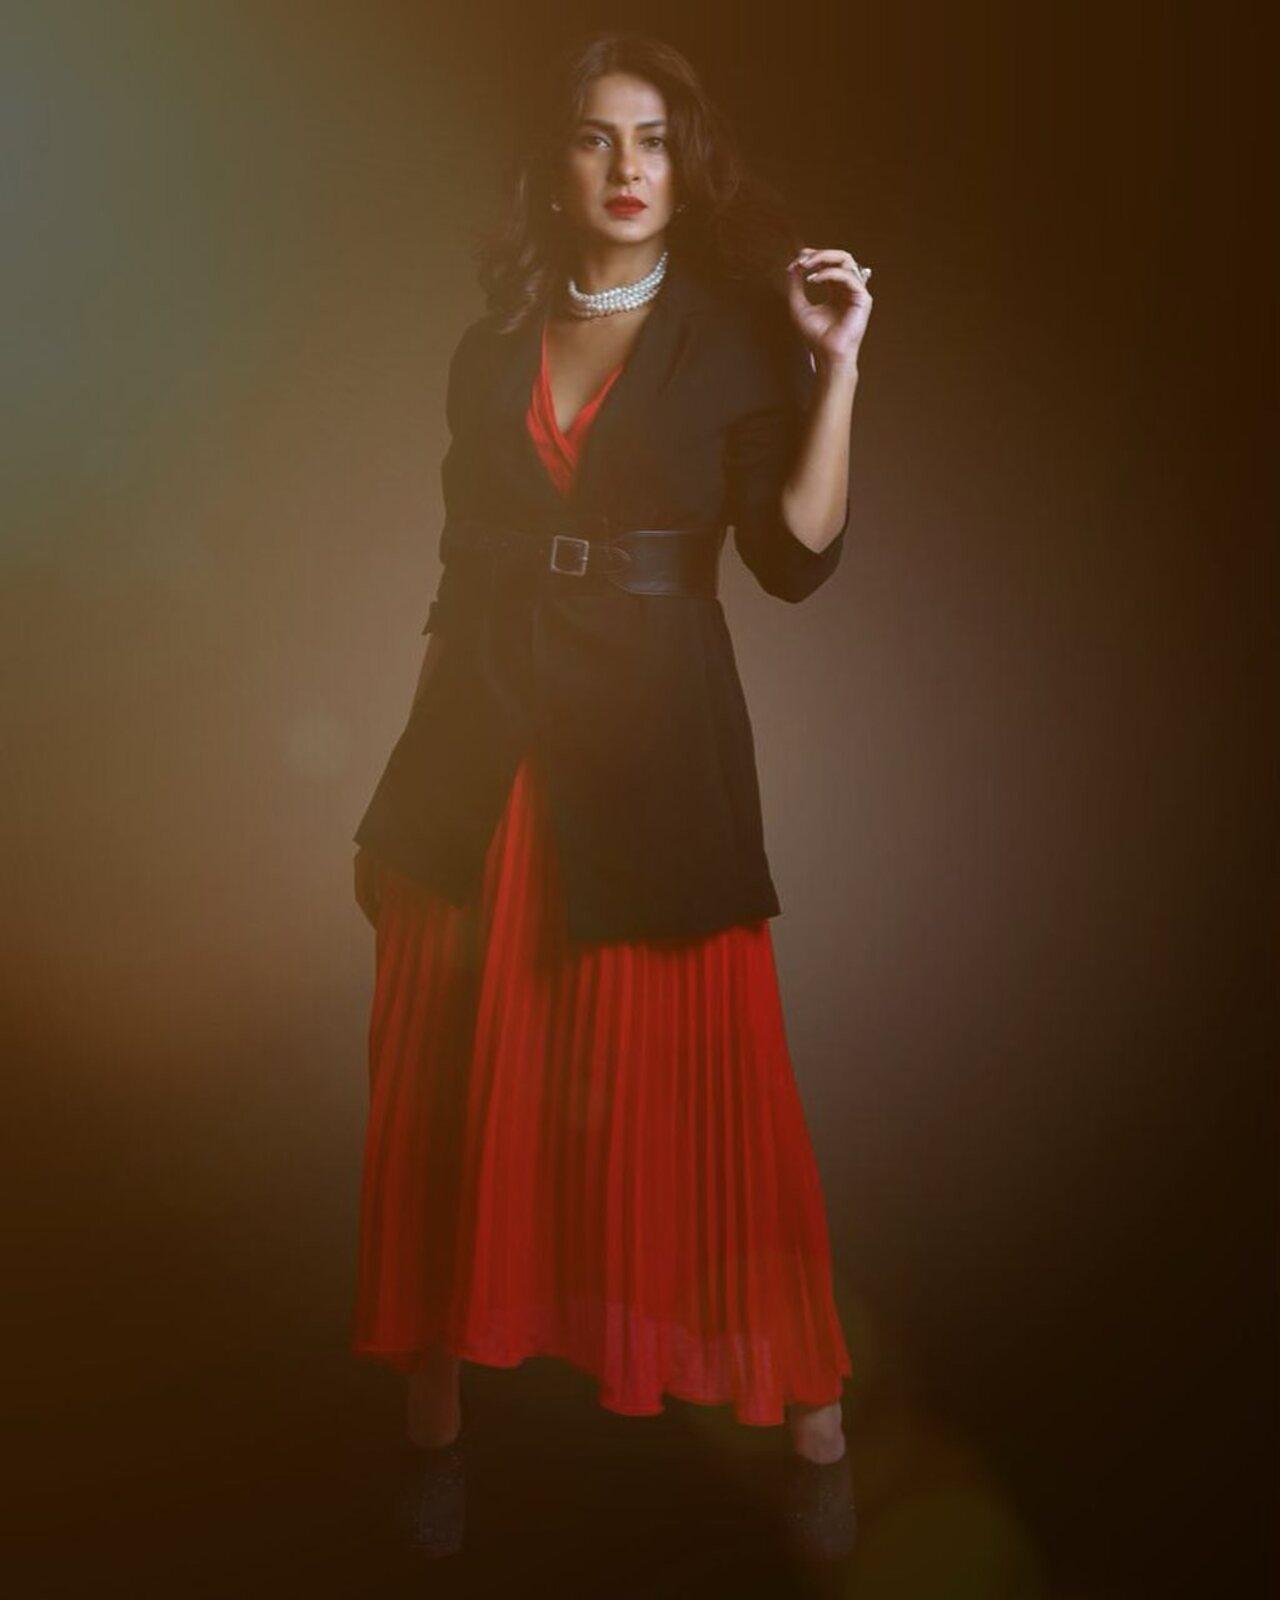 For this look, Jennifer opted for a hot red dress and paired it with a black overcoat. The bold look exuded confidence